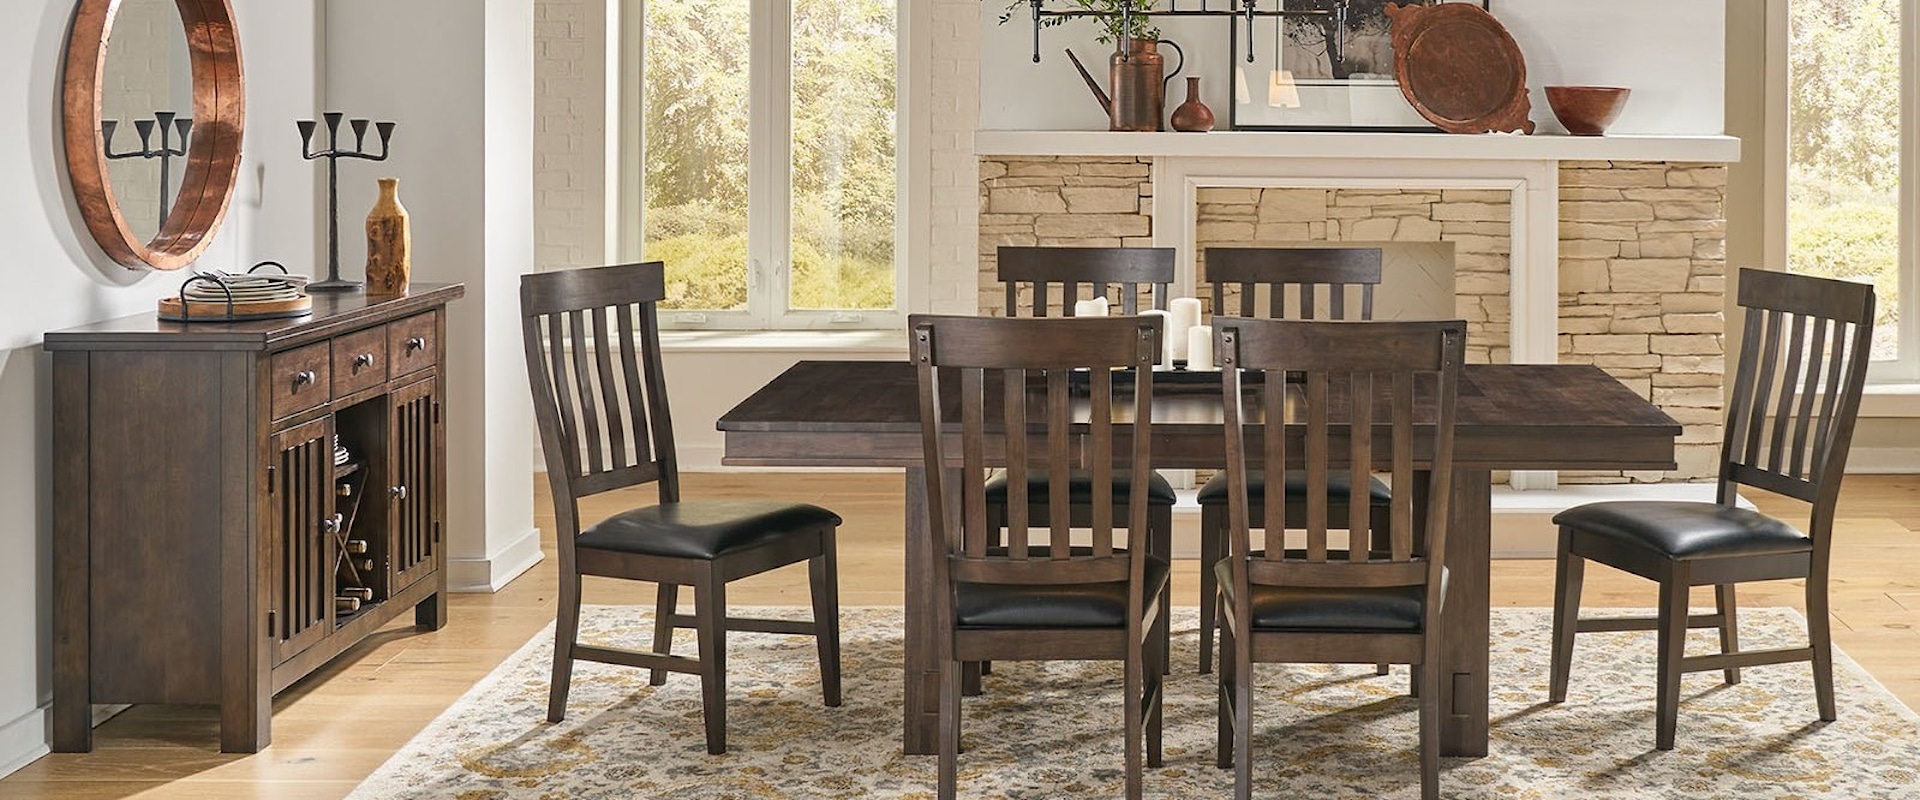 7-Piece Dining and Chair Set